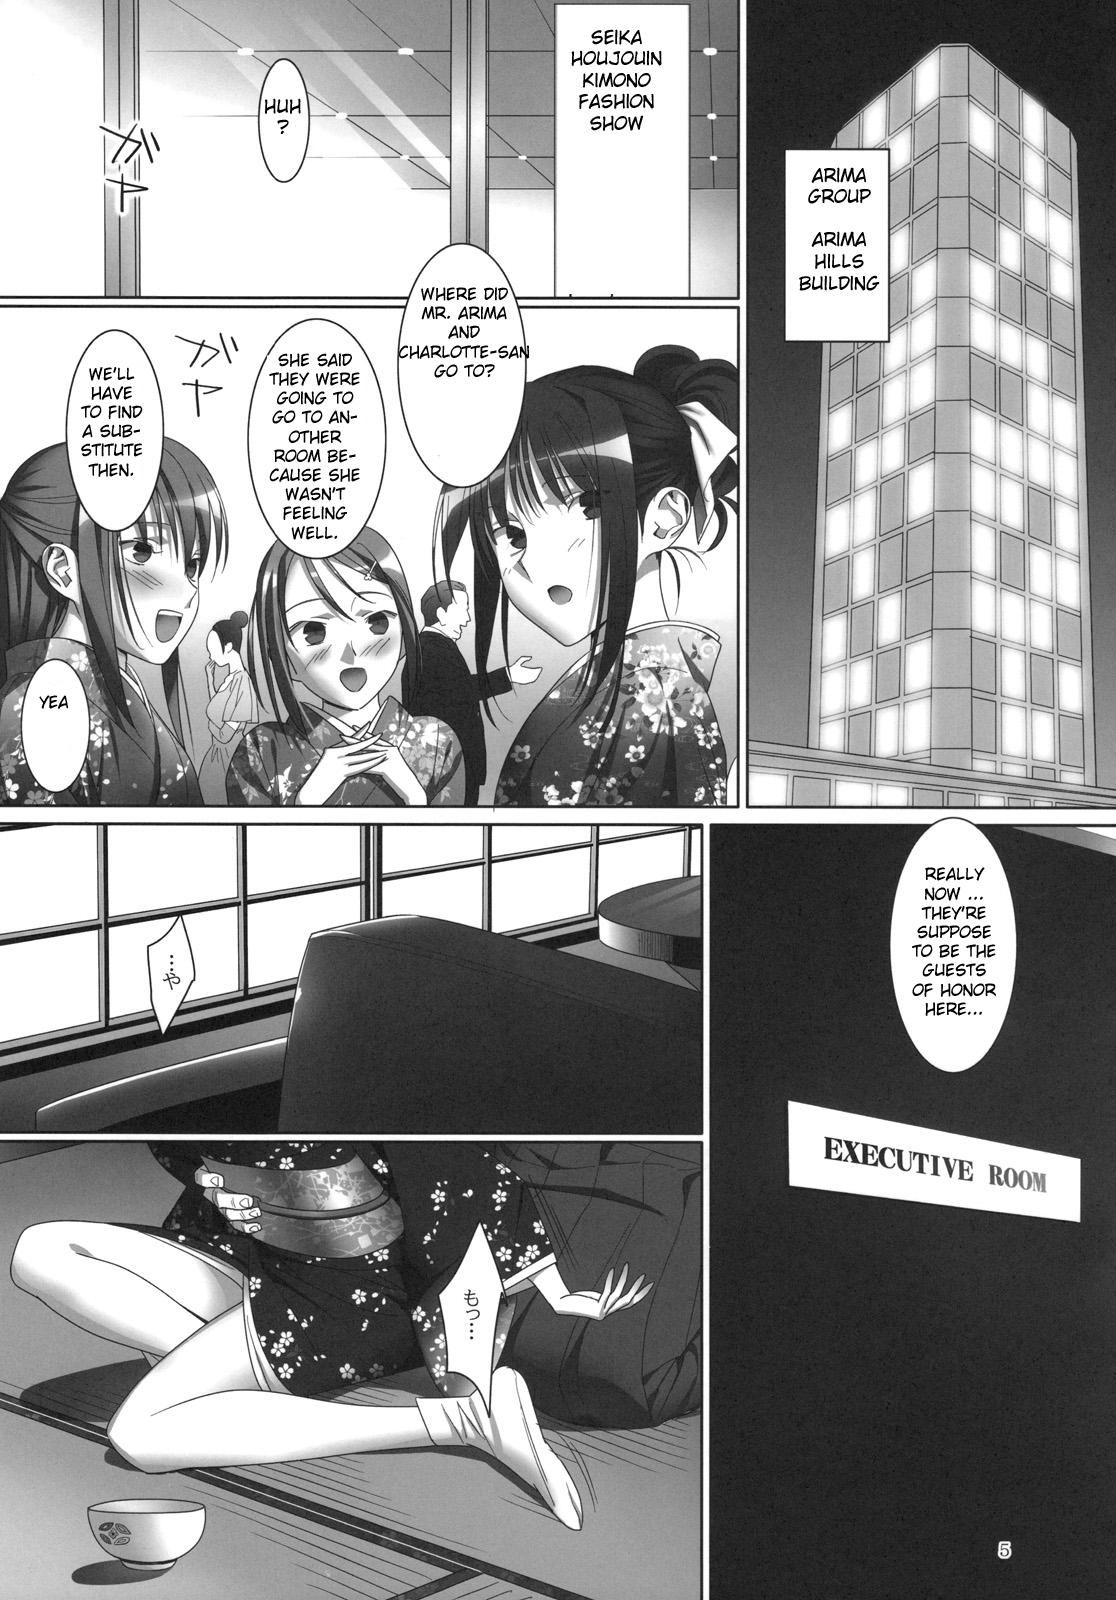 Gets Admired beautiful flower 3 - Princess lover Free Petite Porn - Page 5